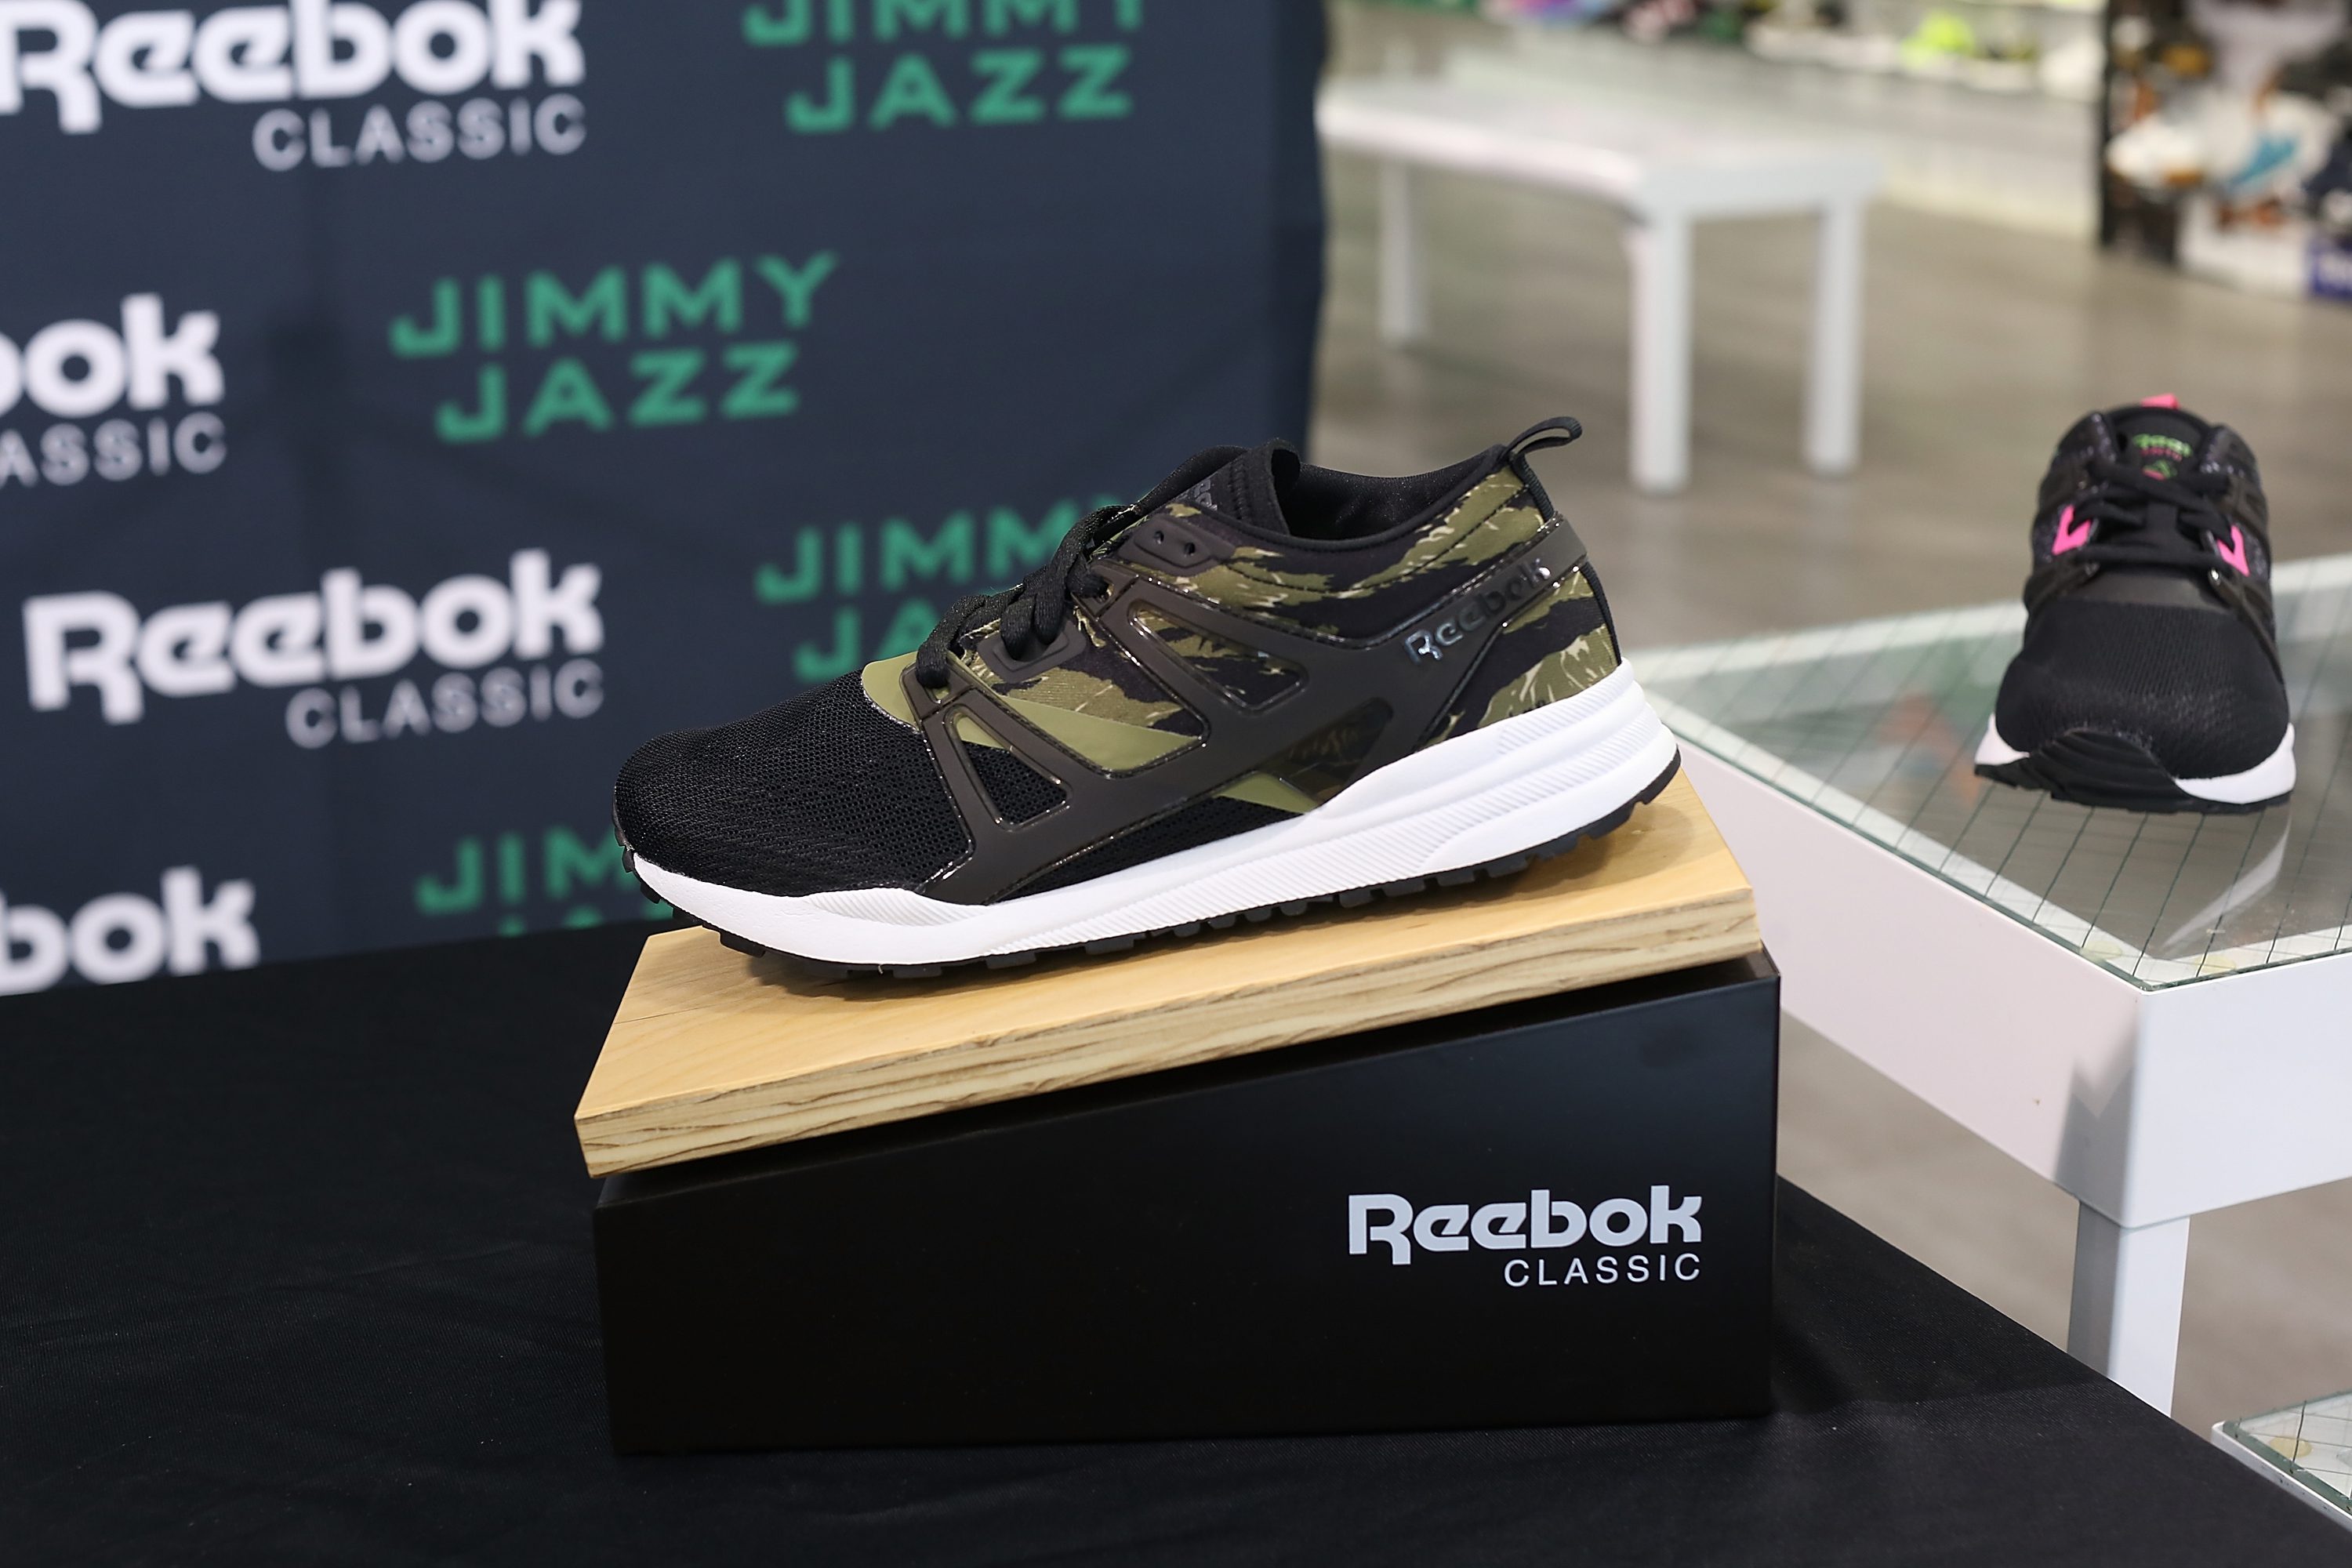 NEW YORK, NY - AUGUST 30:  A general view of the Ventilator ST at Jimmy Jazz in Harlem on August 30, 2015 in New York City.  (Photo by Bennett Raglin/Getty Images for Reebok)